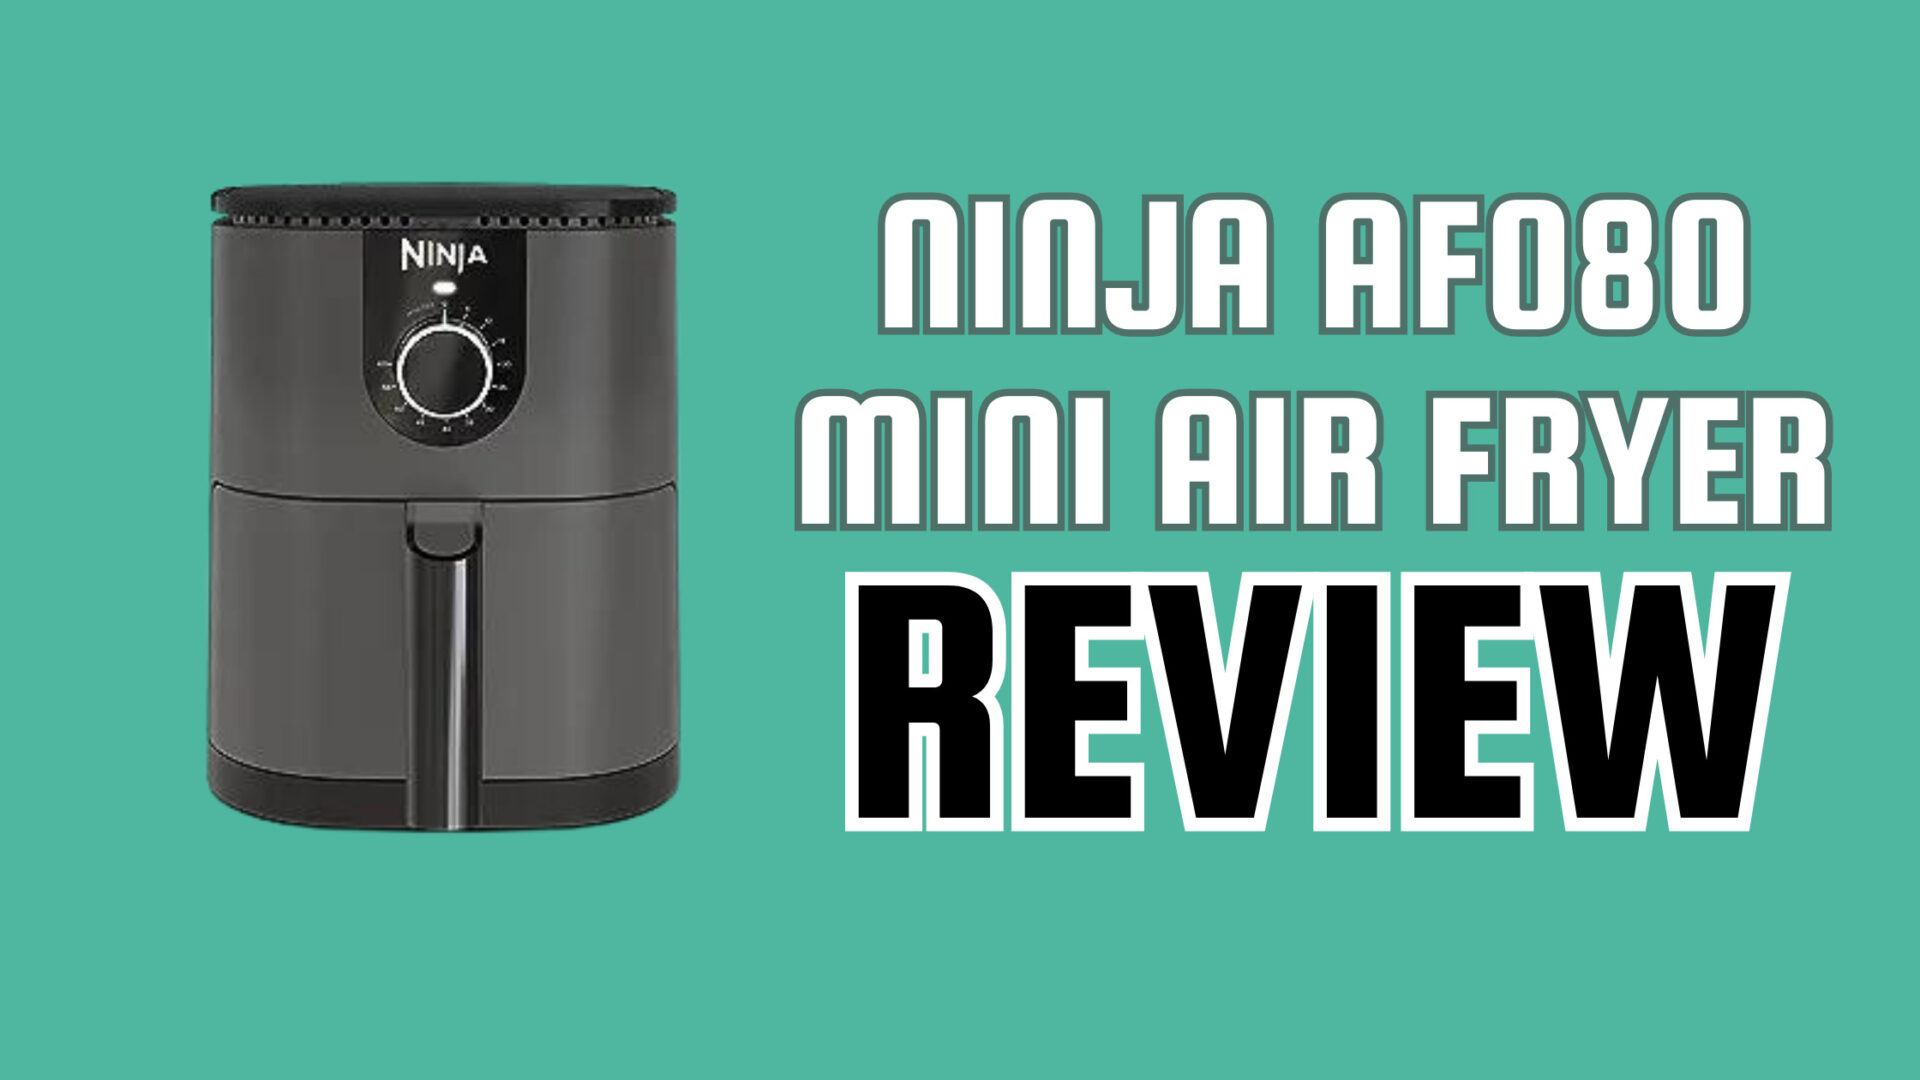 Ninja AF080 Mini Air Fryer Review: Crispy and Delicious Results Every Time  